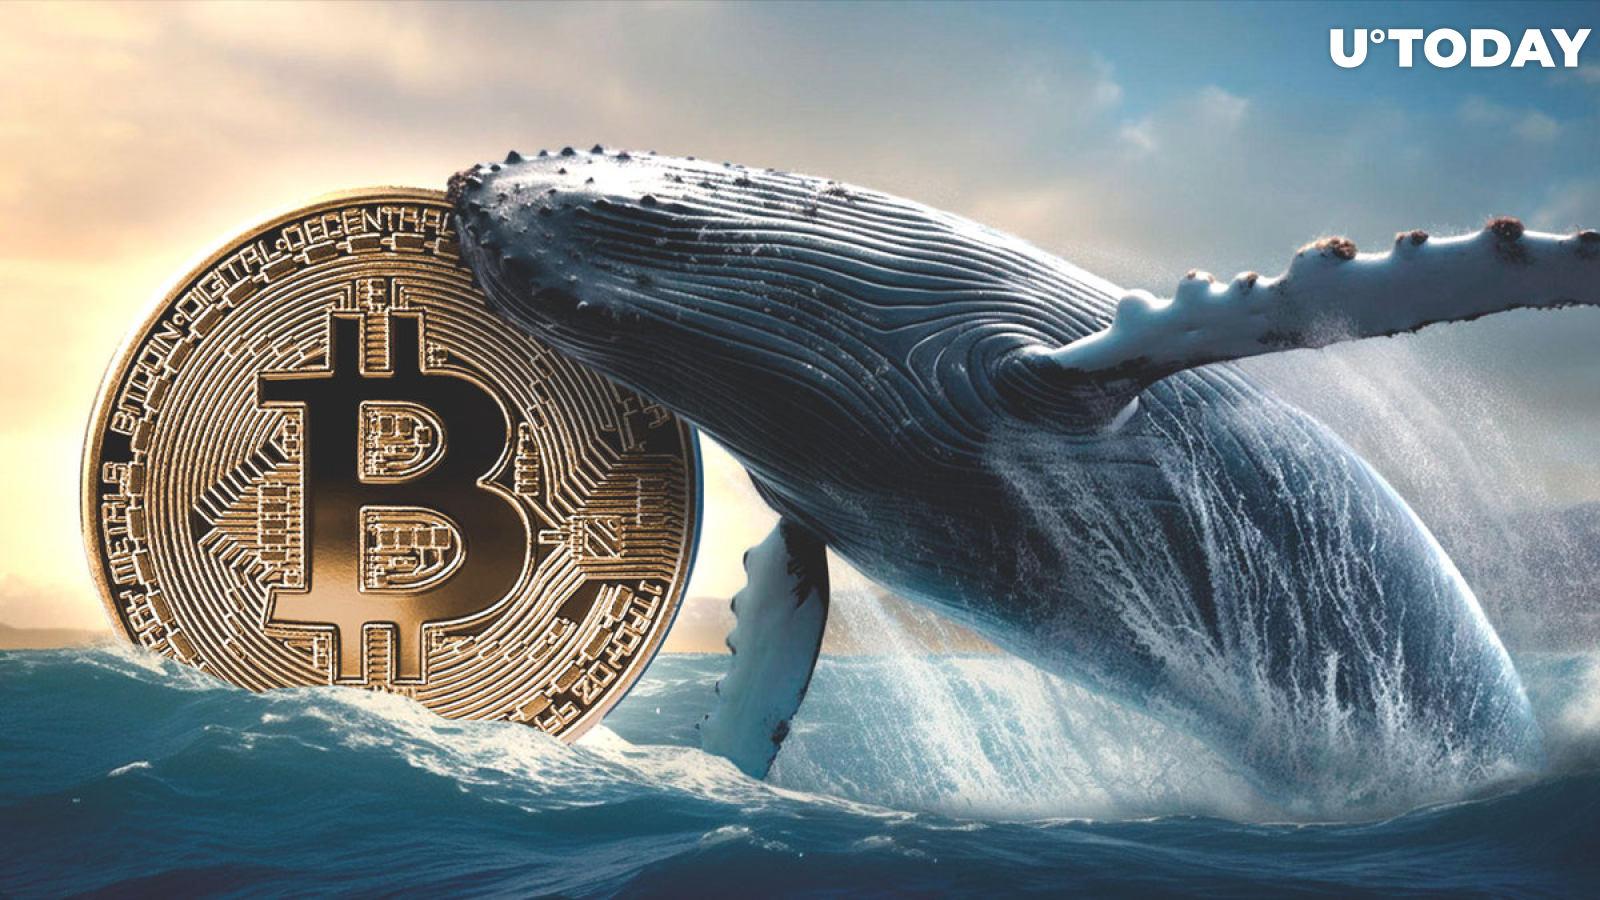 Bitcoin (BTC) Whales' Holdings Skyrocket by 6,900% Amid Price Dip